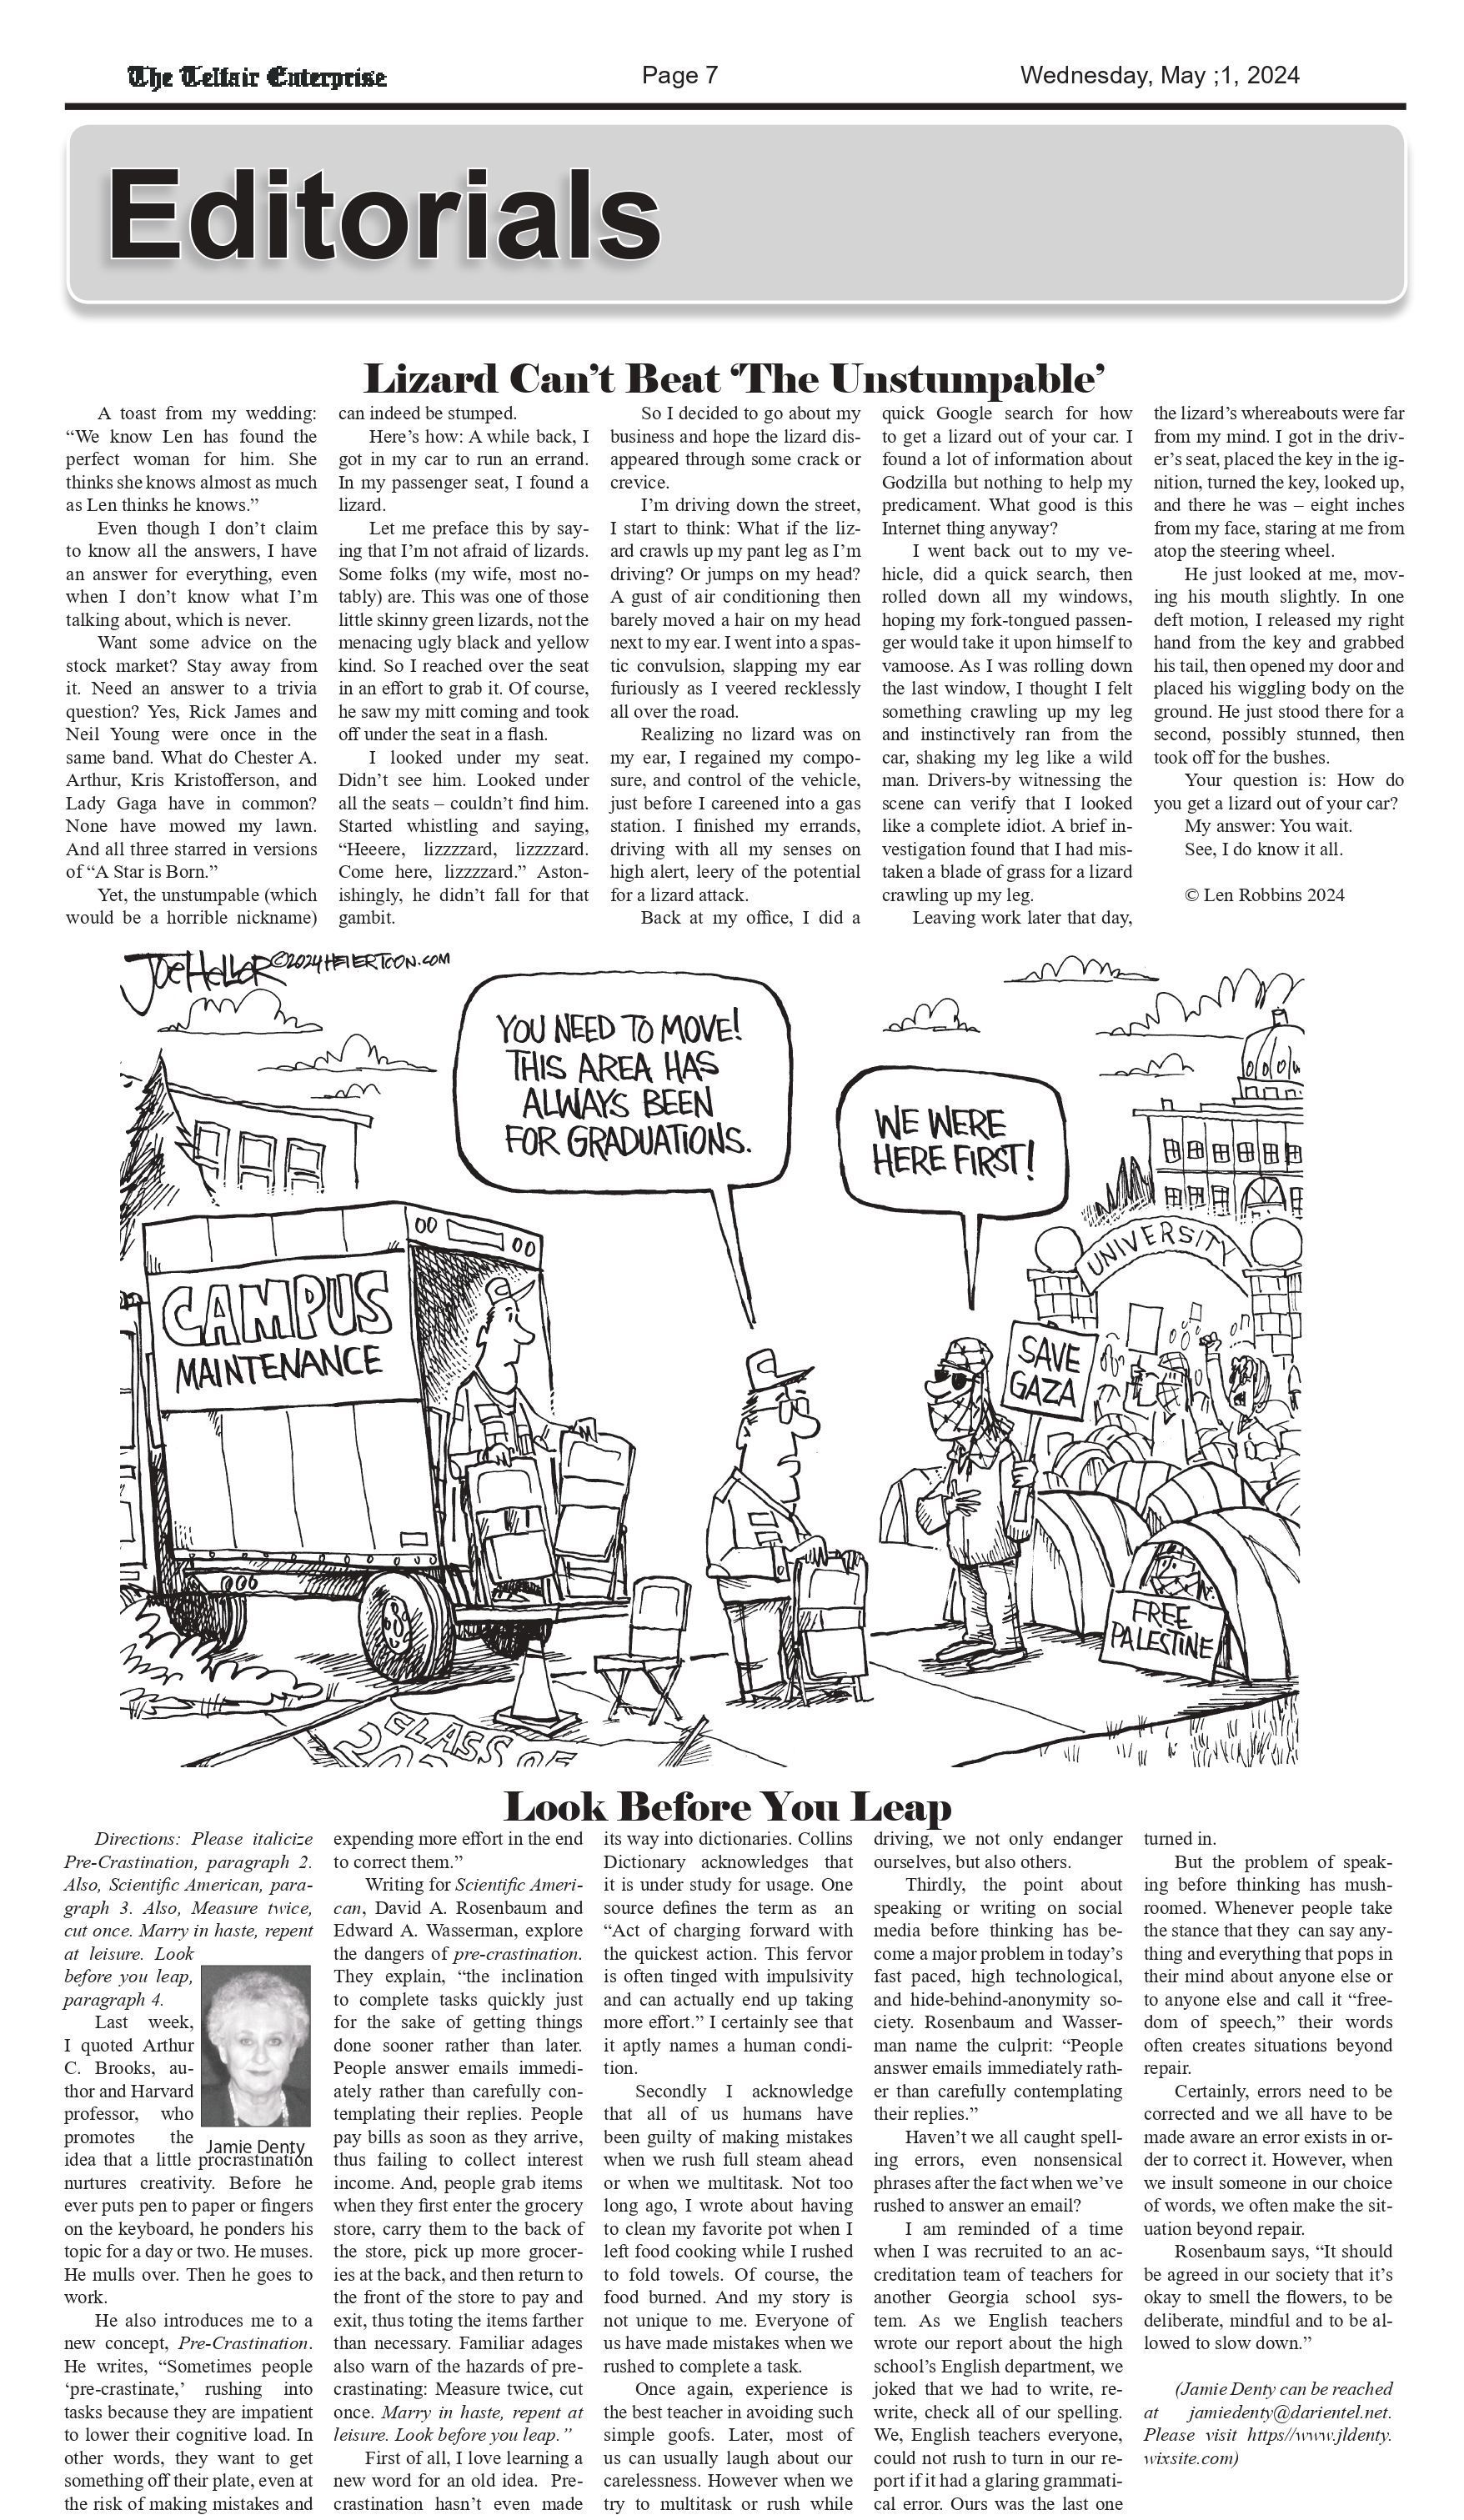 A page of a newspaper with a cartoon on it.